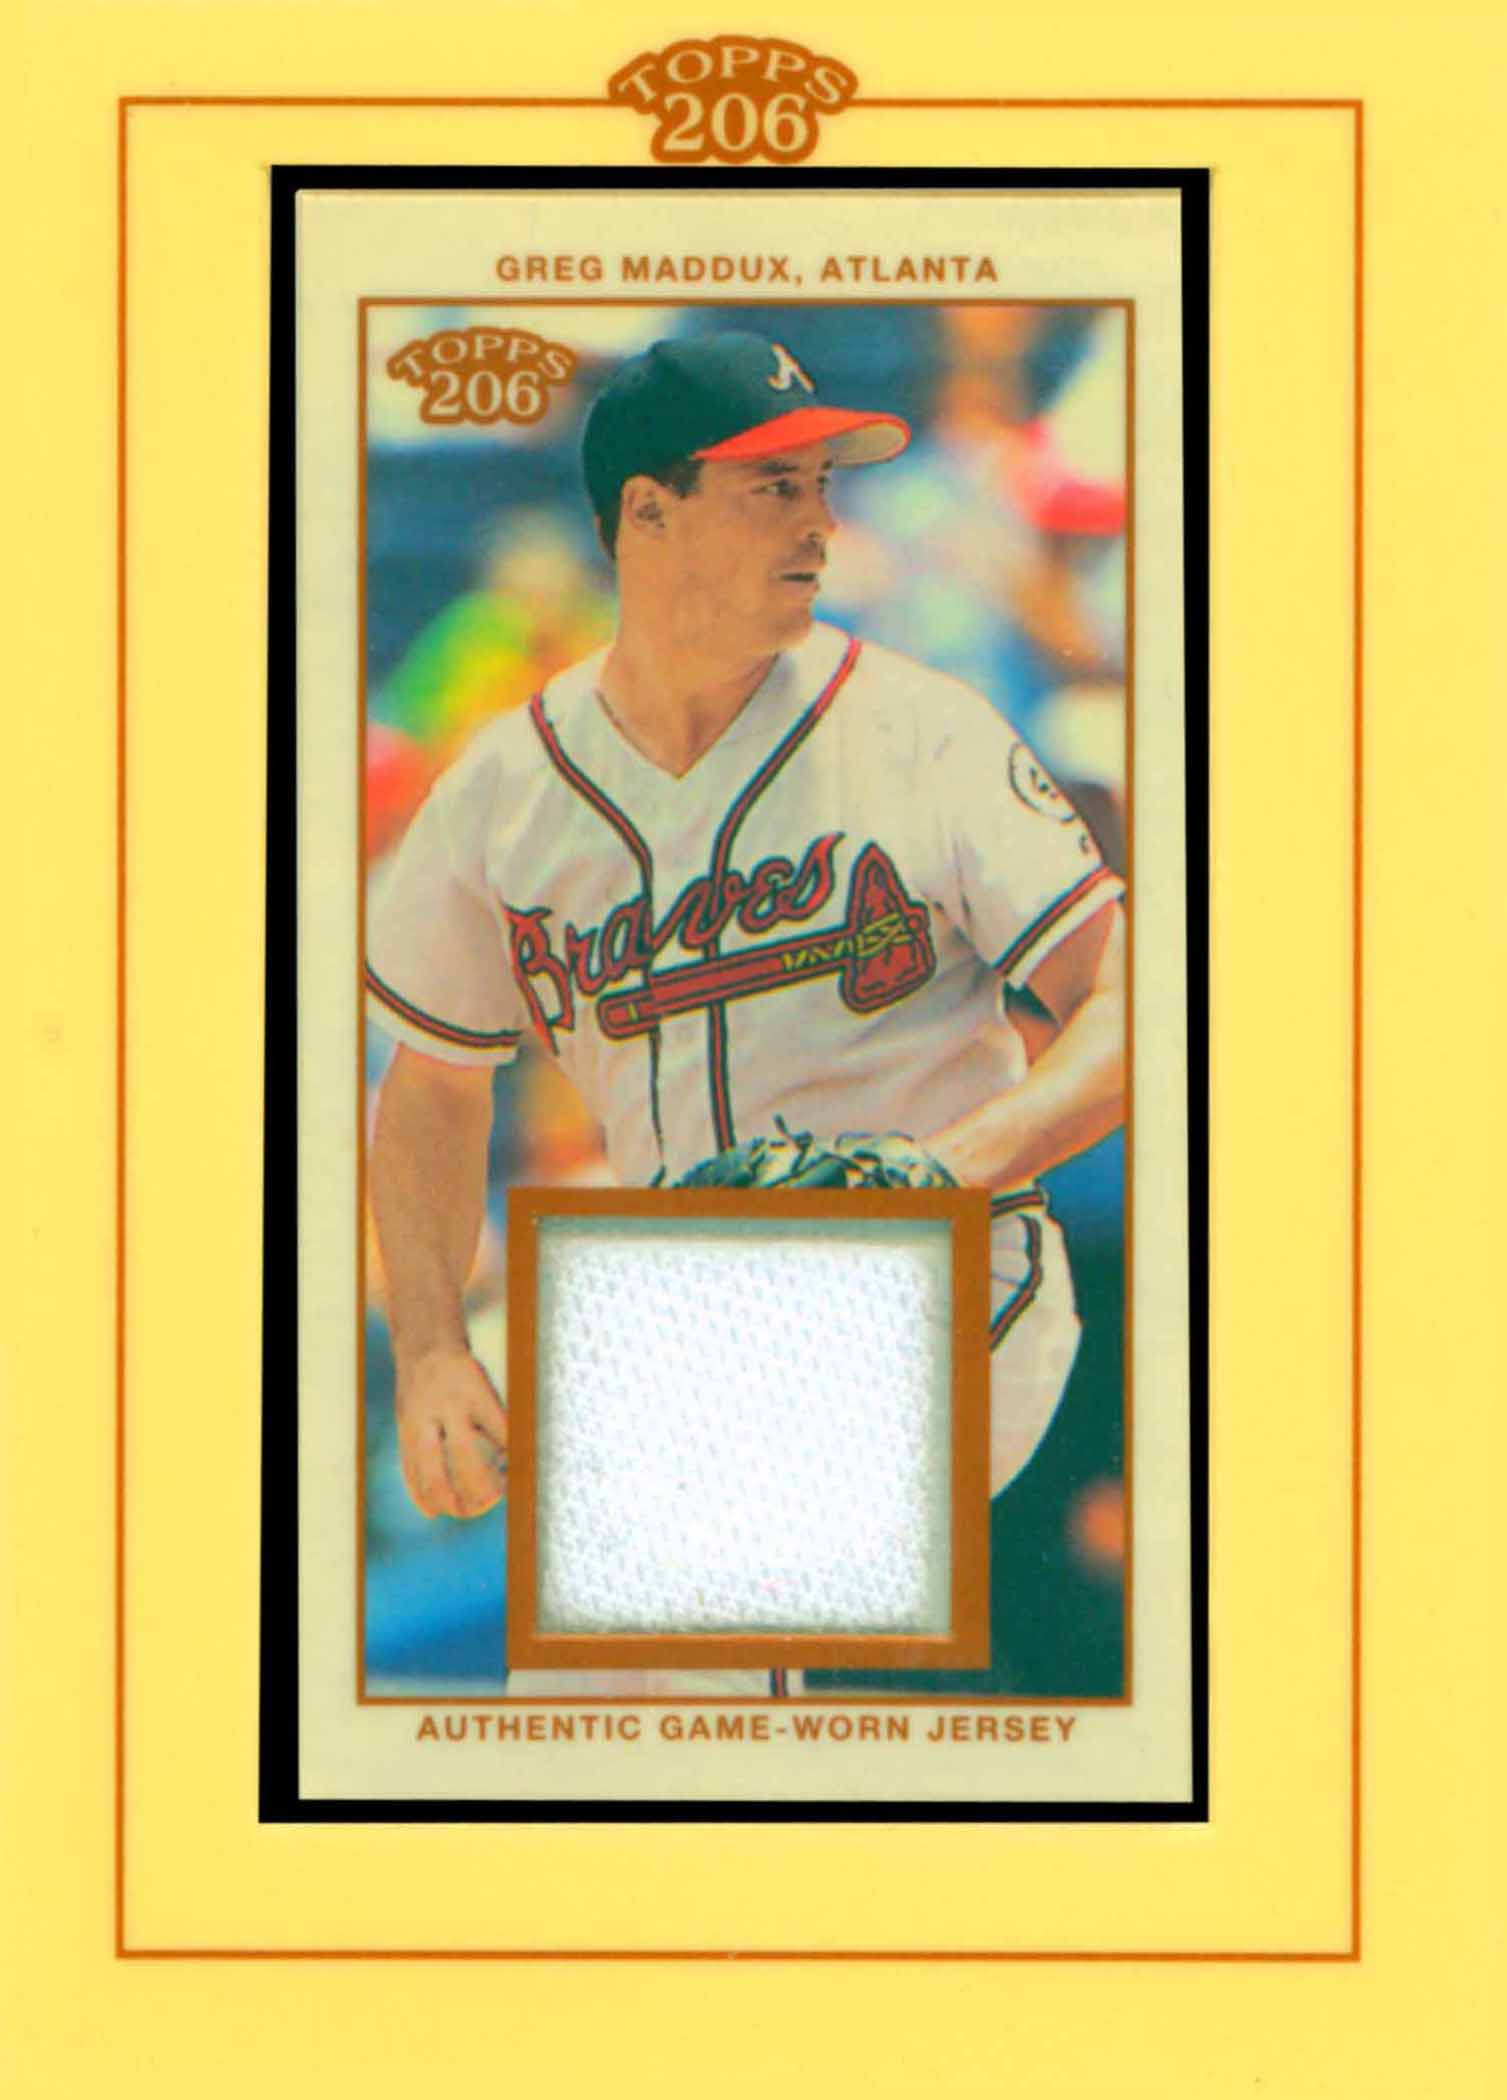 2002 Topps 206 Relics Jersey